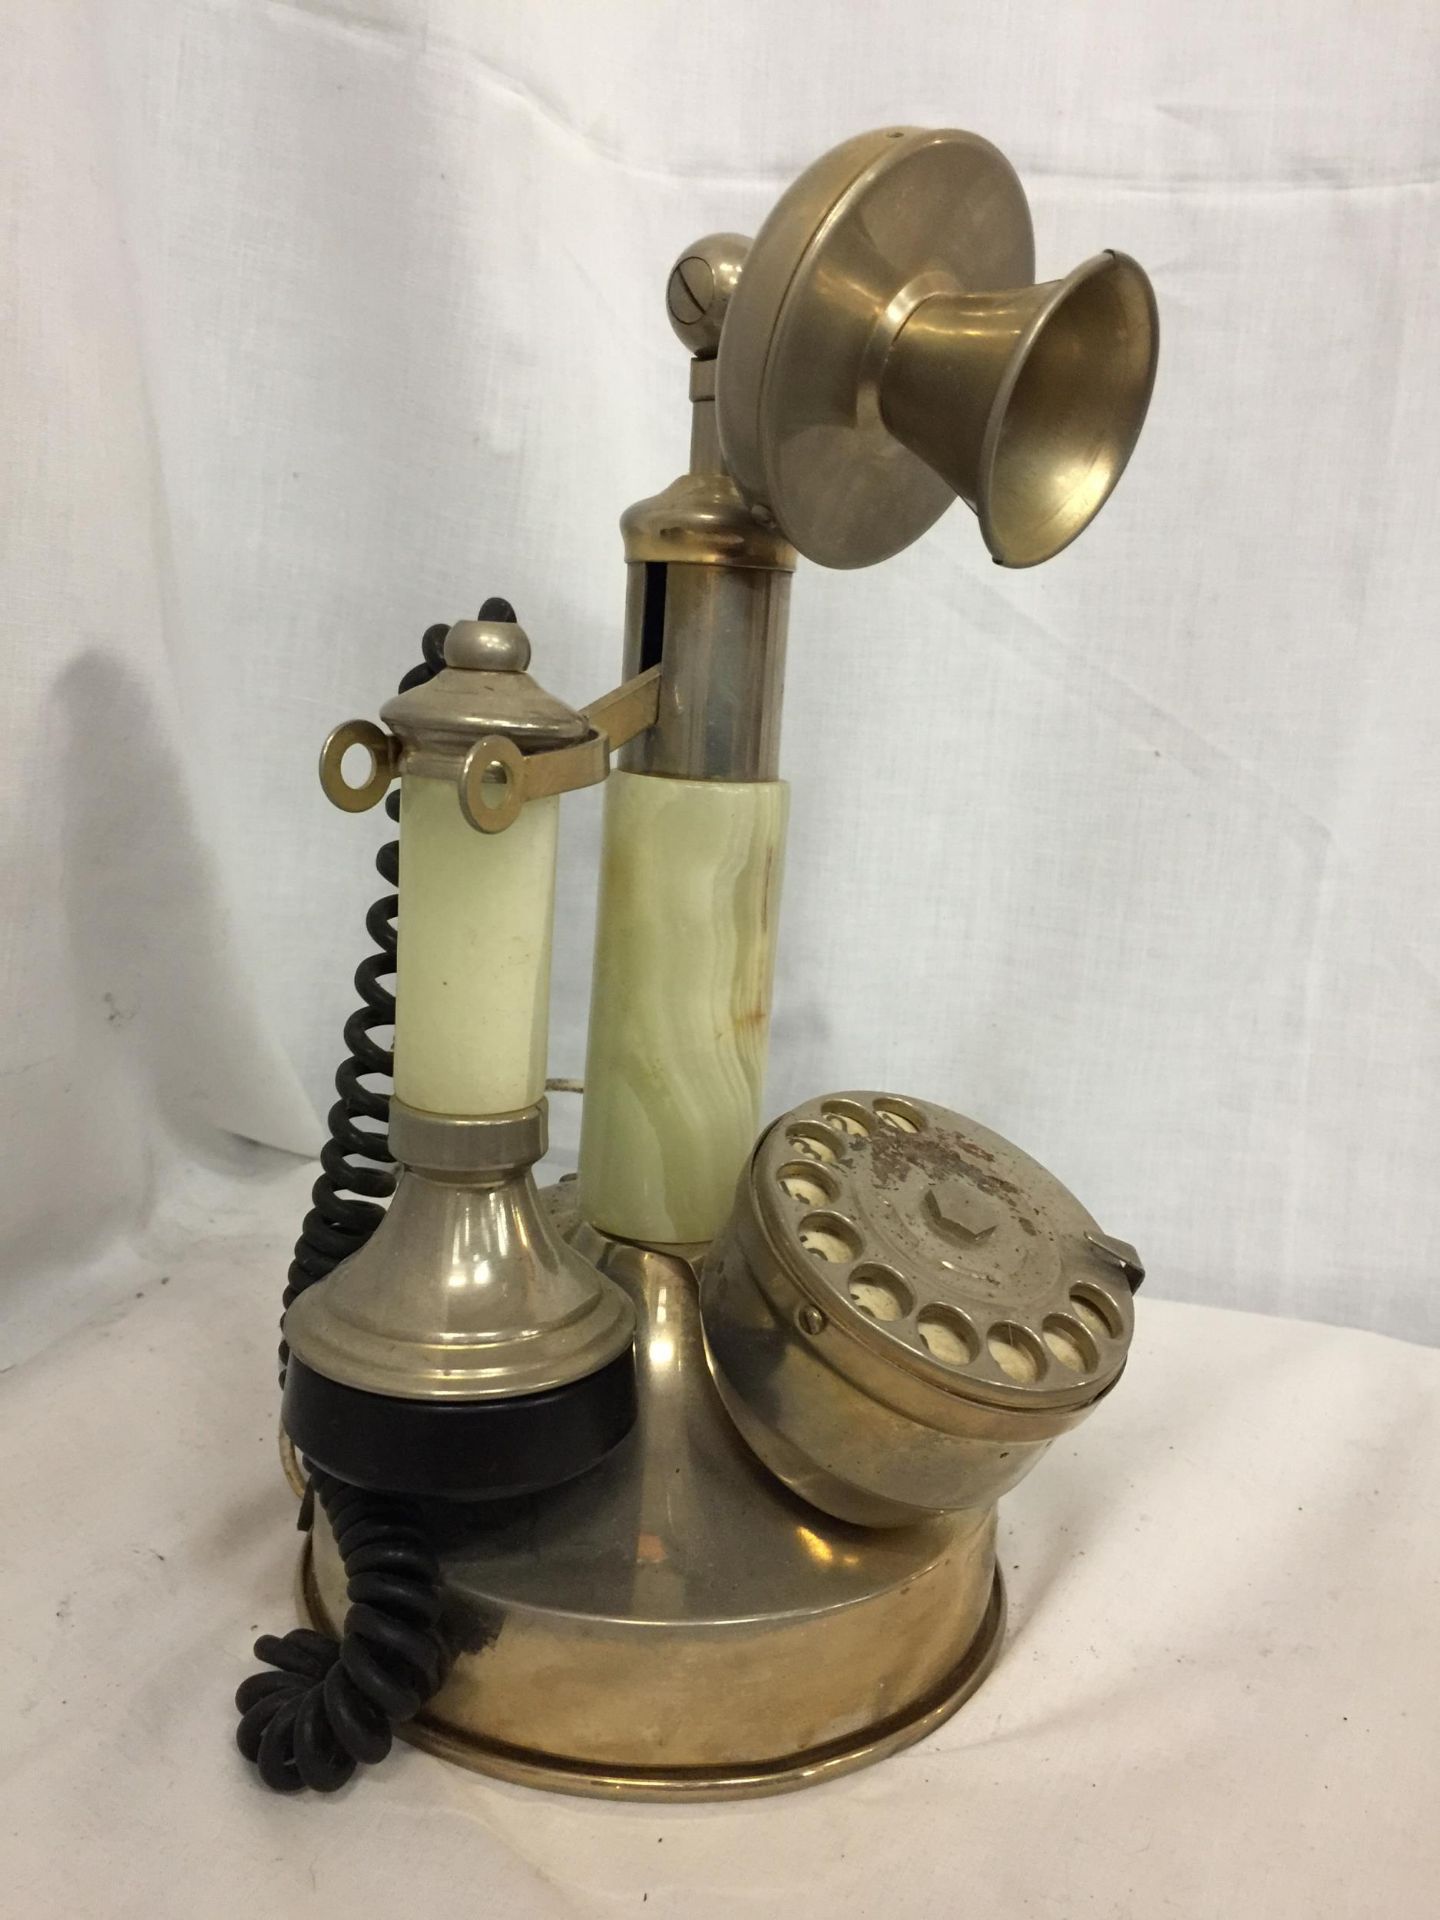 A VINTAGE STYLE WHITE METAL AND ONYX CANDLESTICK TELEPHONE CONVERTED TO MODERN SOCKET - Image 2 of 5